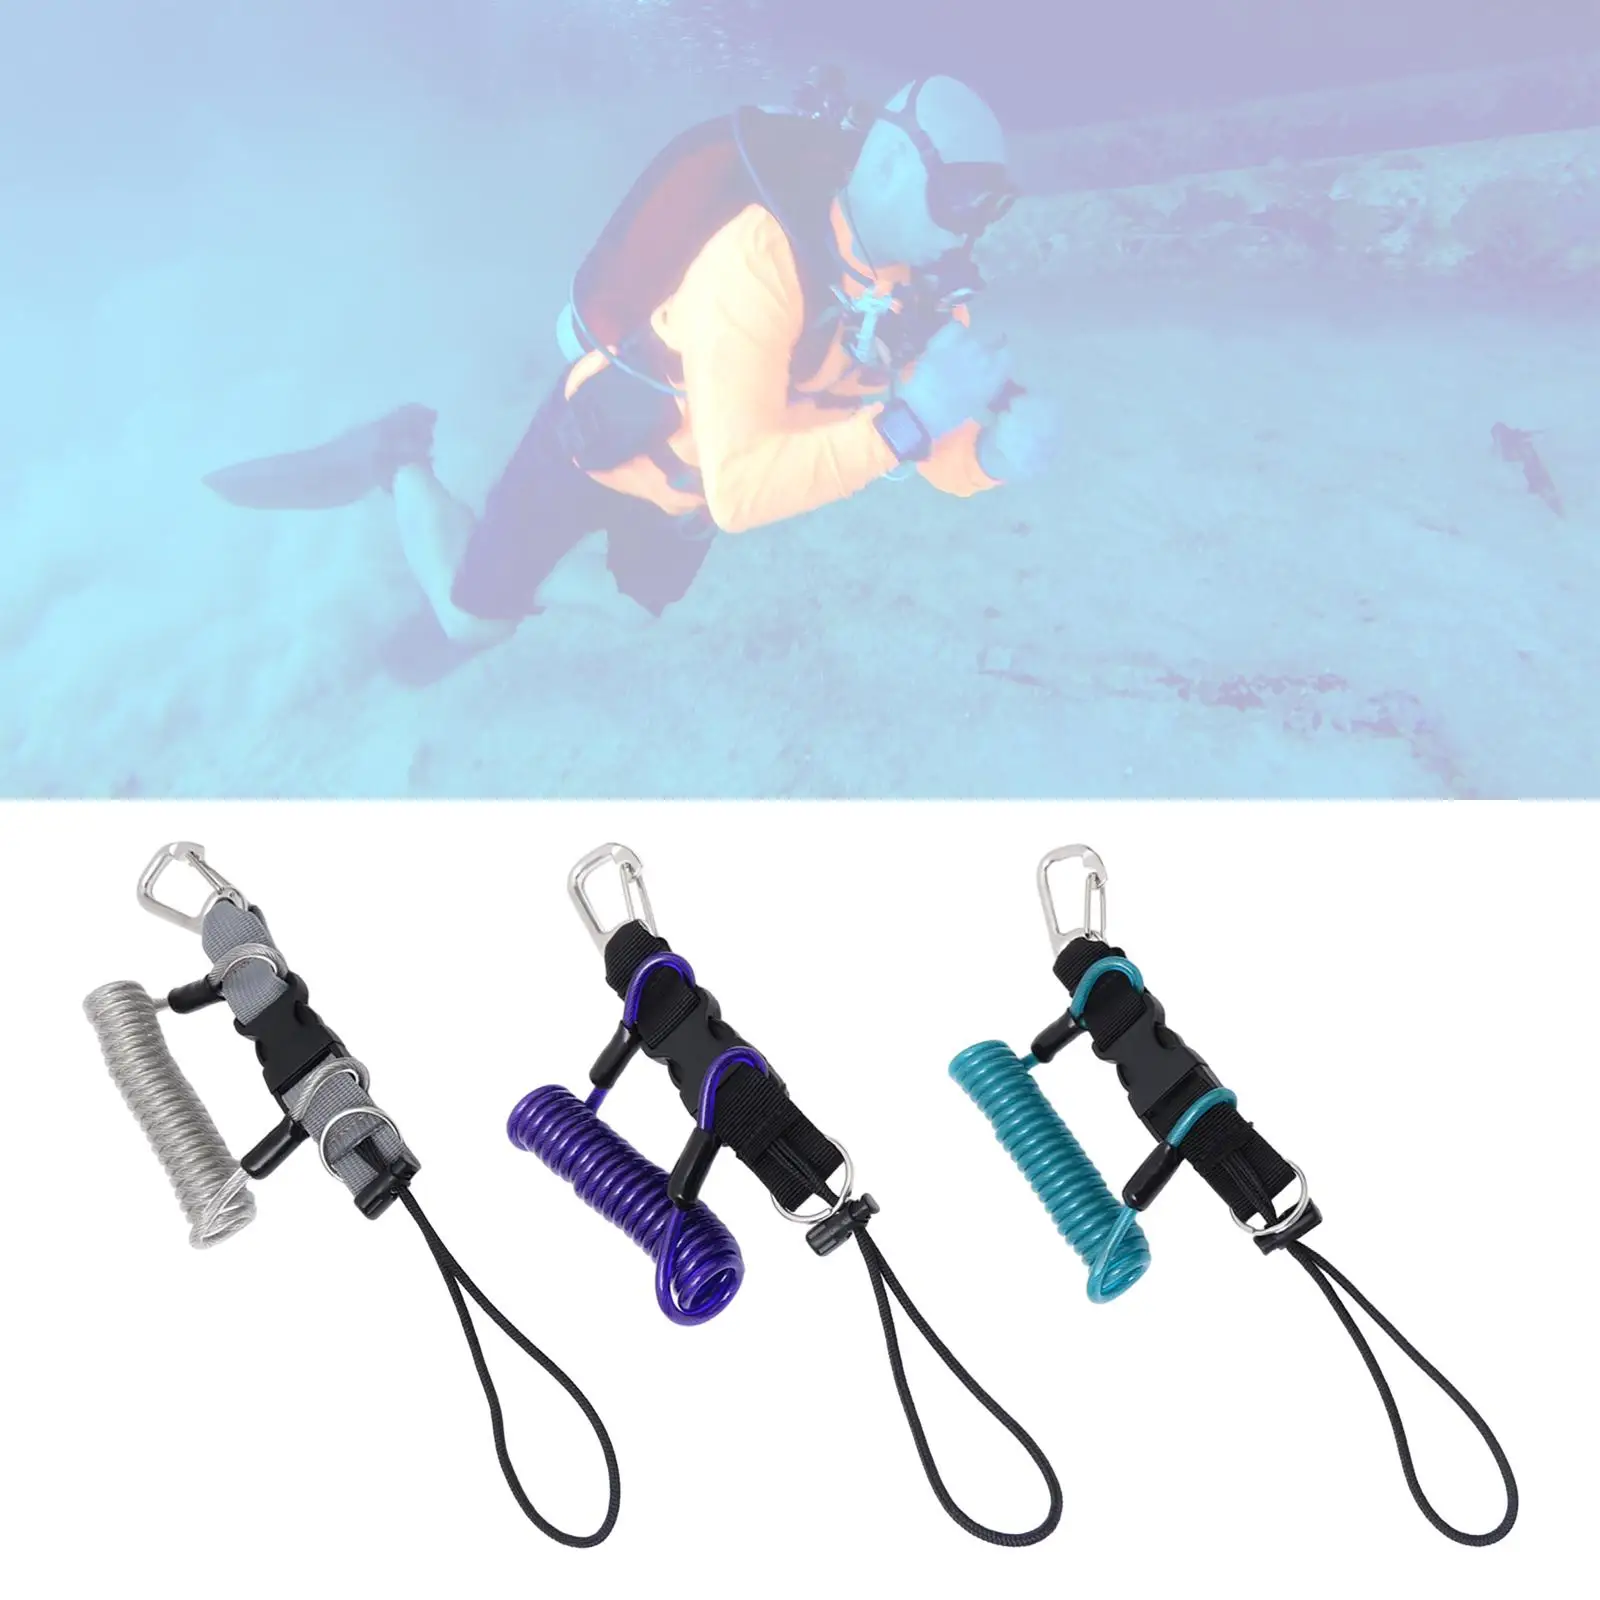 Diving Lanyard Stainless Steel Wrist Lanyard Wristband Rope for under Water Sports Drifting Diving Underwater Photography Tools